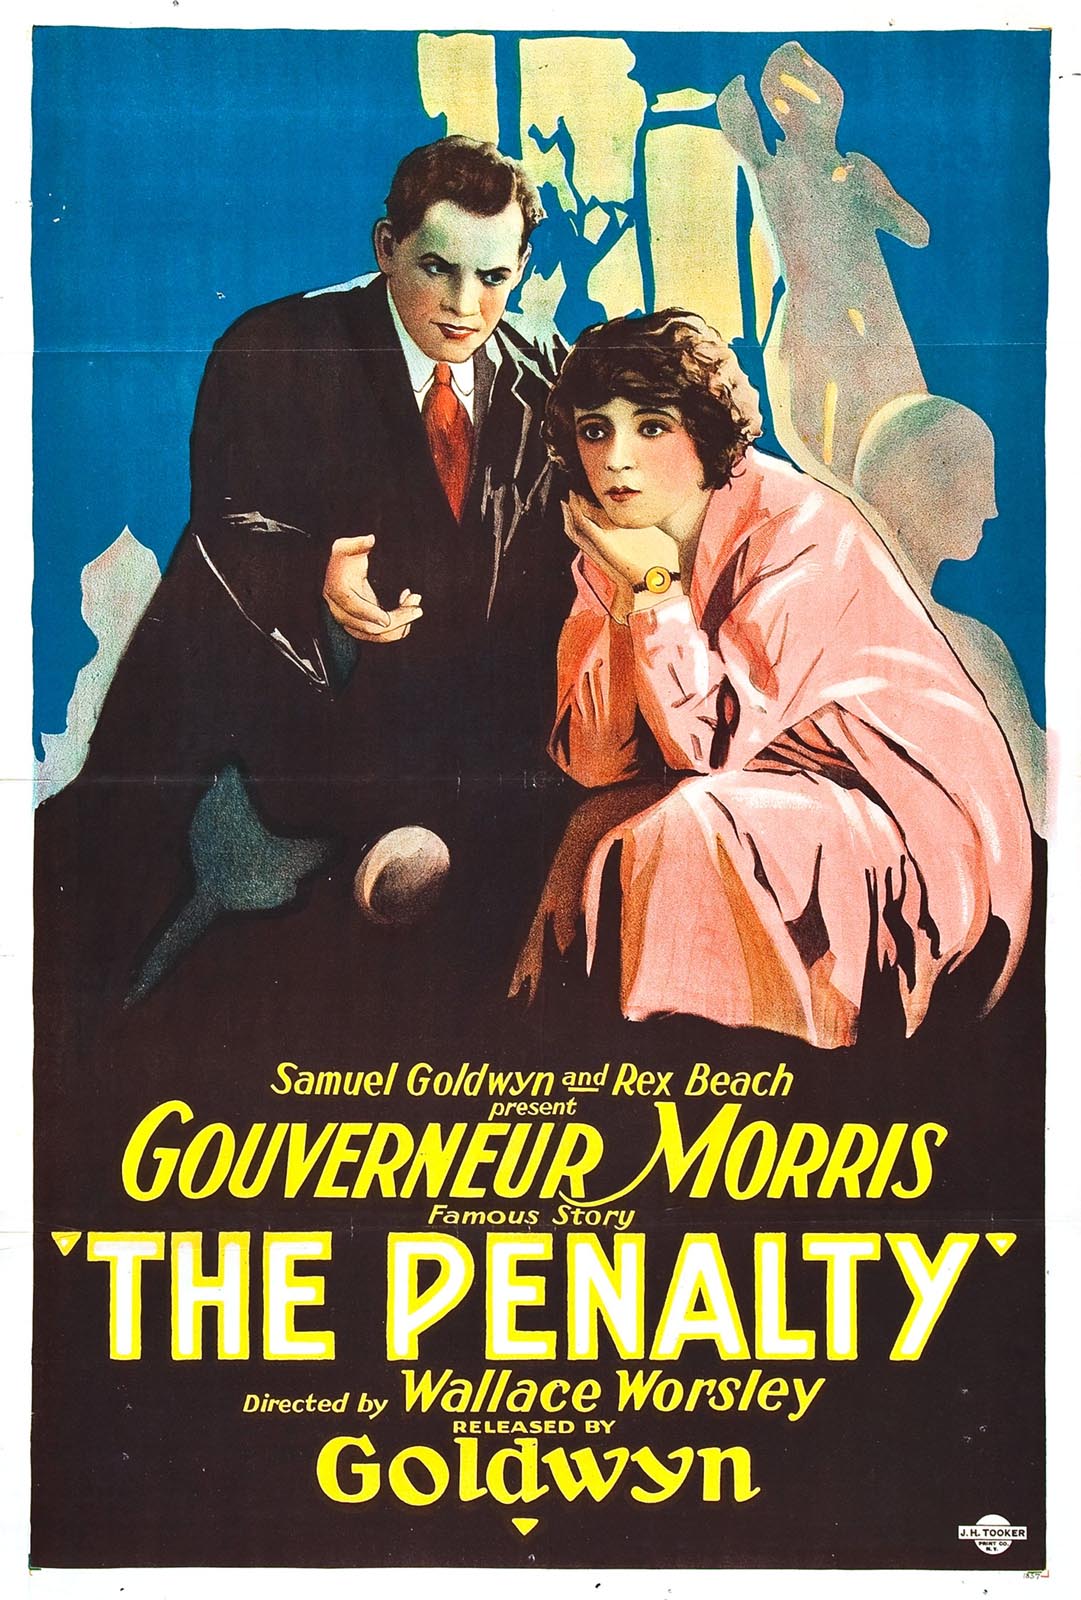 PENALTY, THE